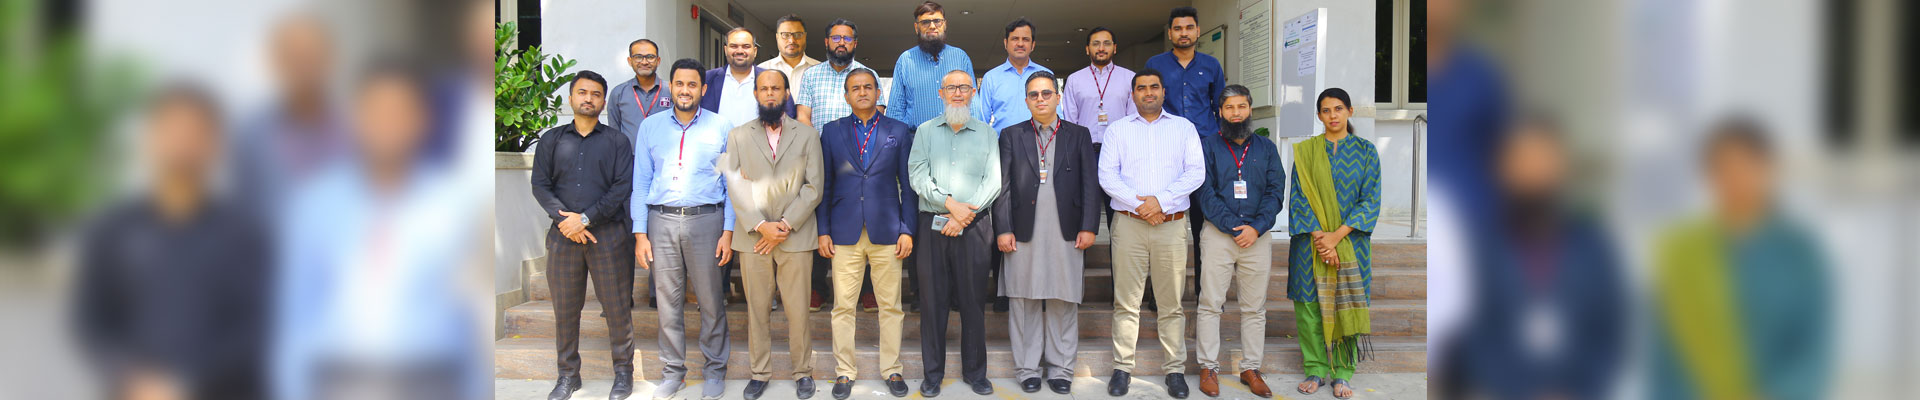 Diploma in Corporate Laws Launched at IBA Karachi: A Milestone in Legal Education